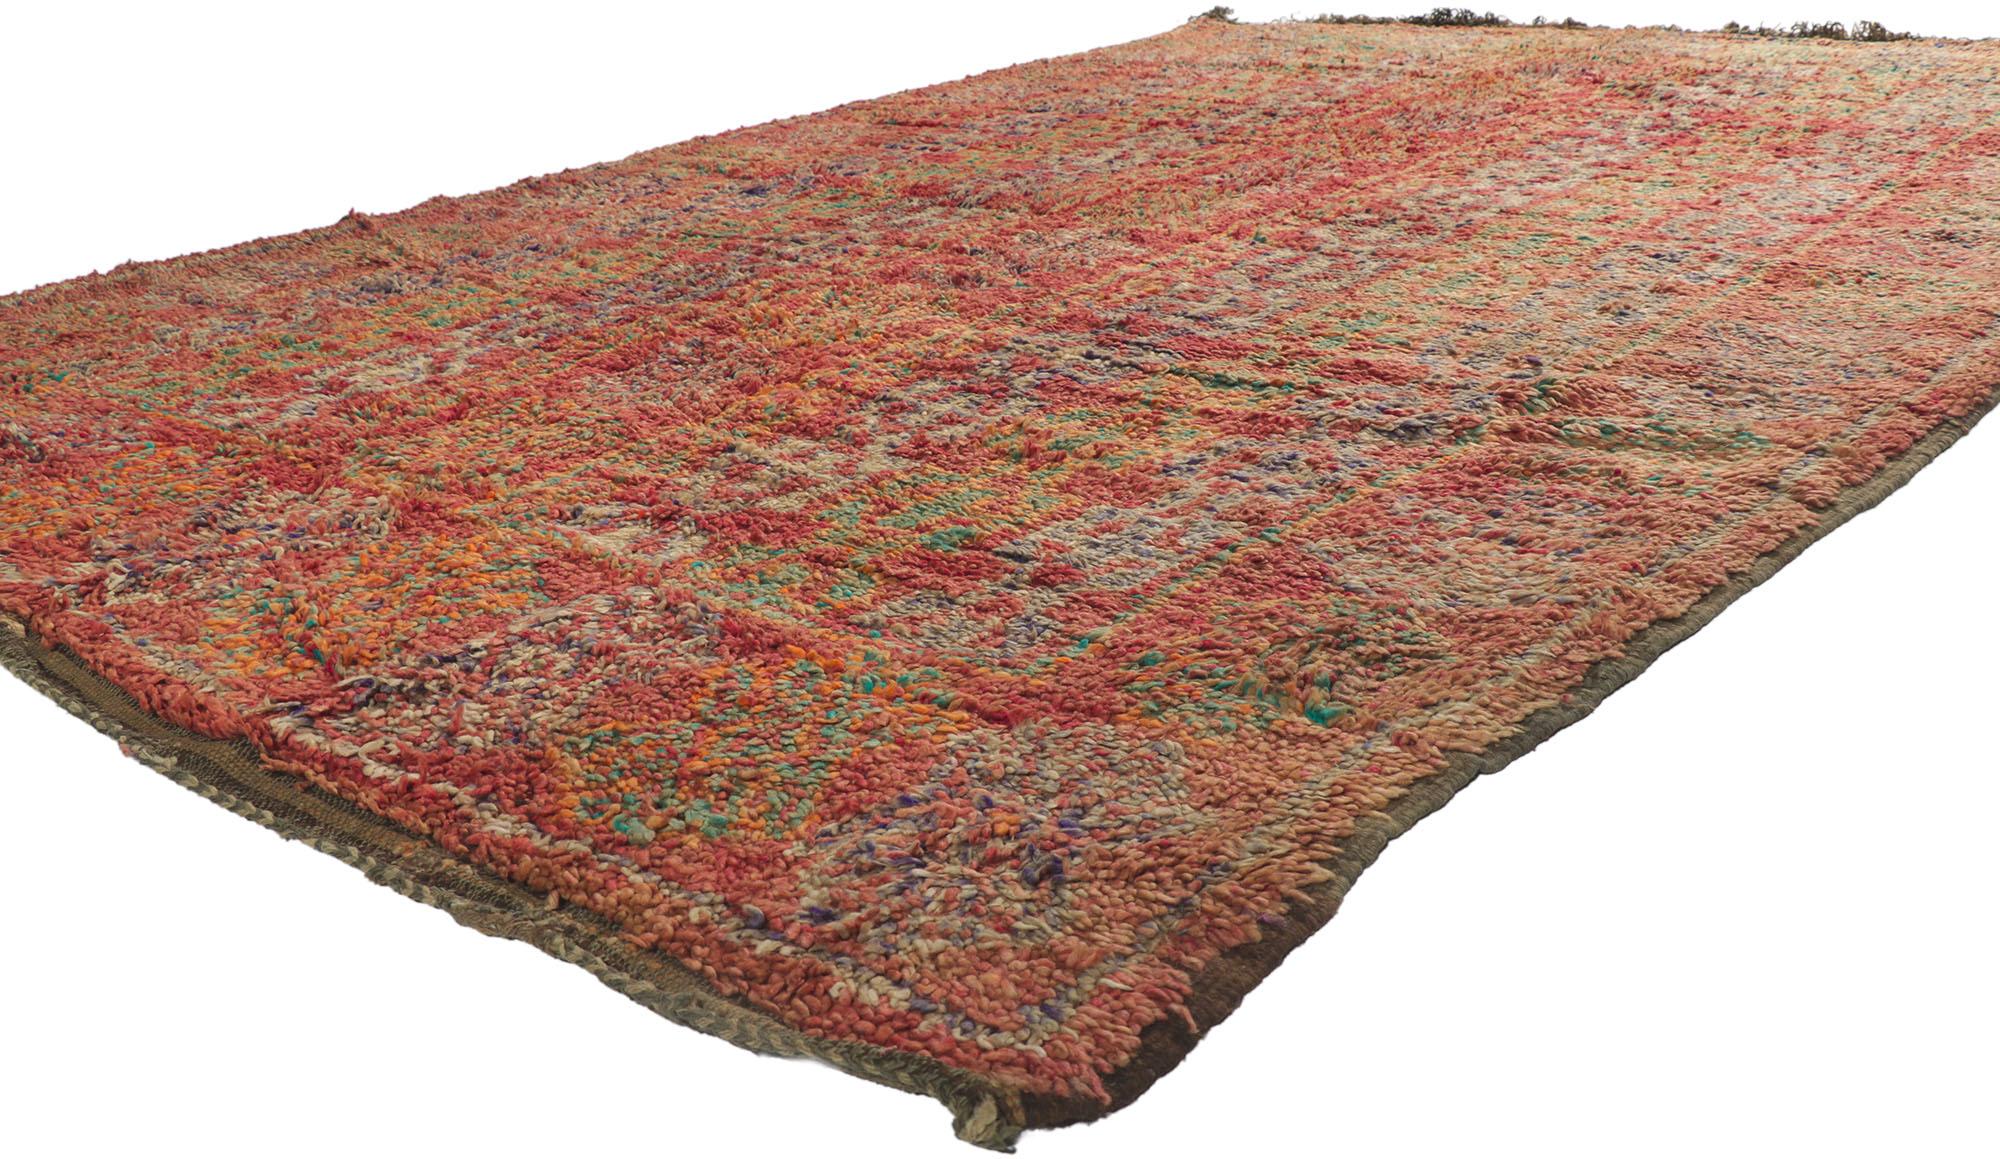 21202 Vintage Beni MGuild Moroccan Rug, 07'01 x 10'09.
Nomadic charm meets southwest style in this hand-knotted wool vintage Moroccan rug. The distinctive tribal elements and lively earth-tone colors woven into this piece work together to bring